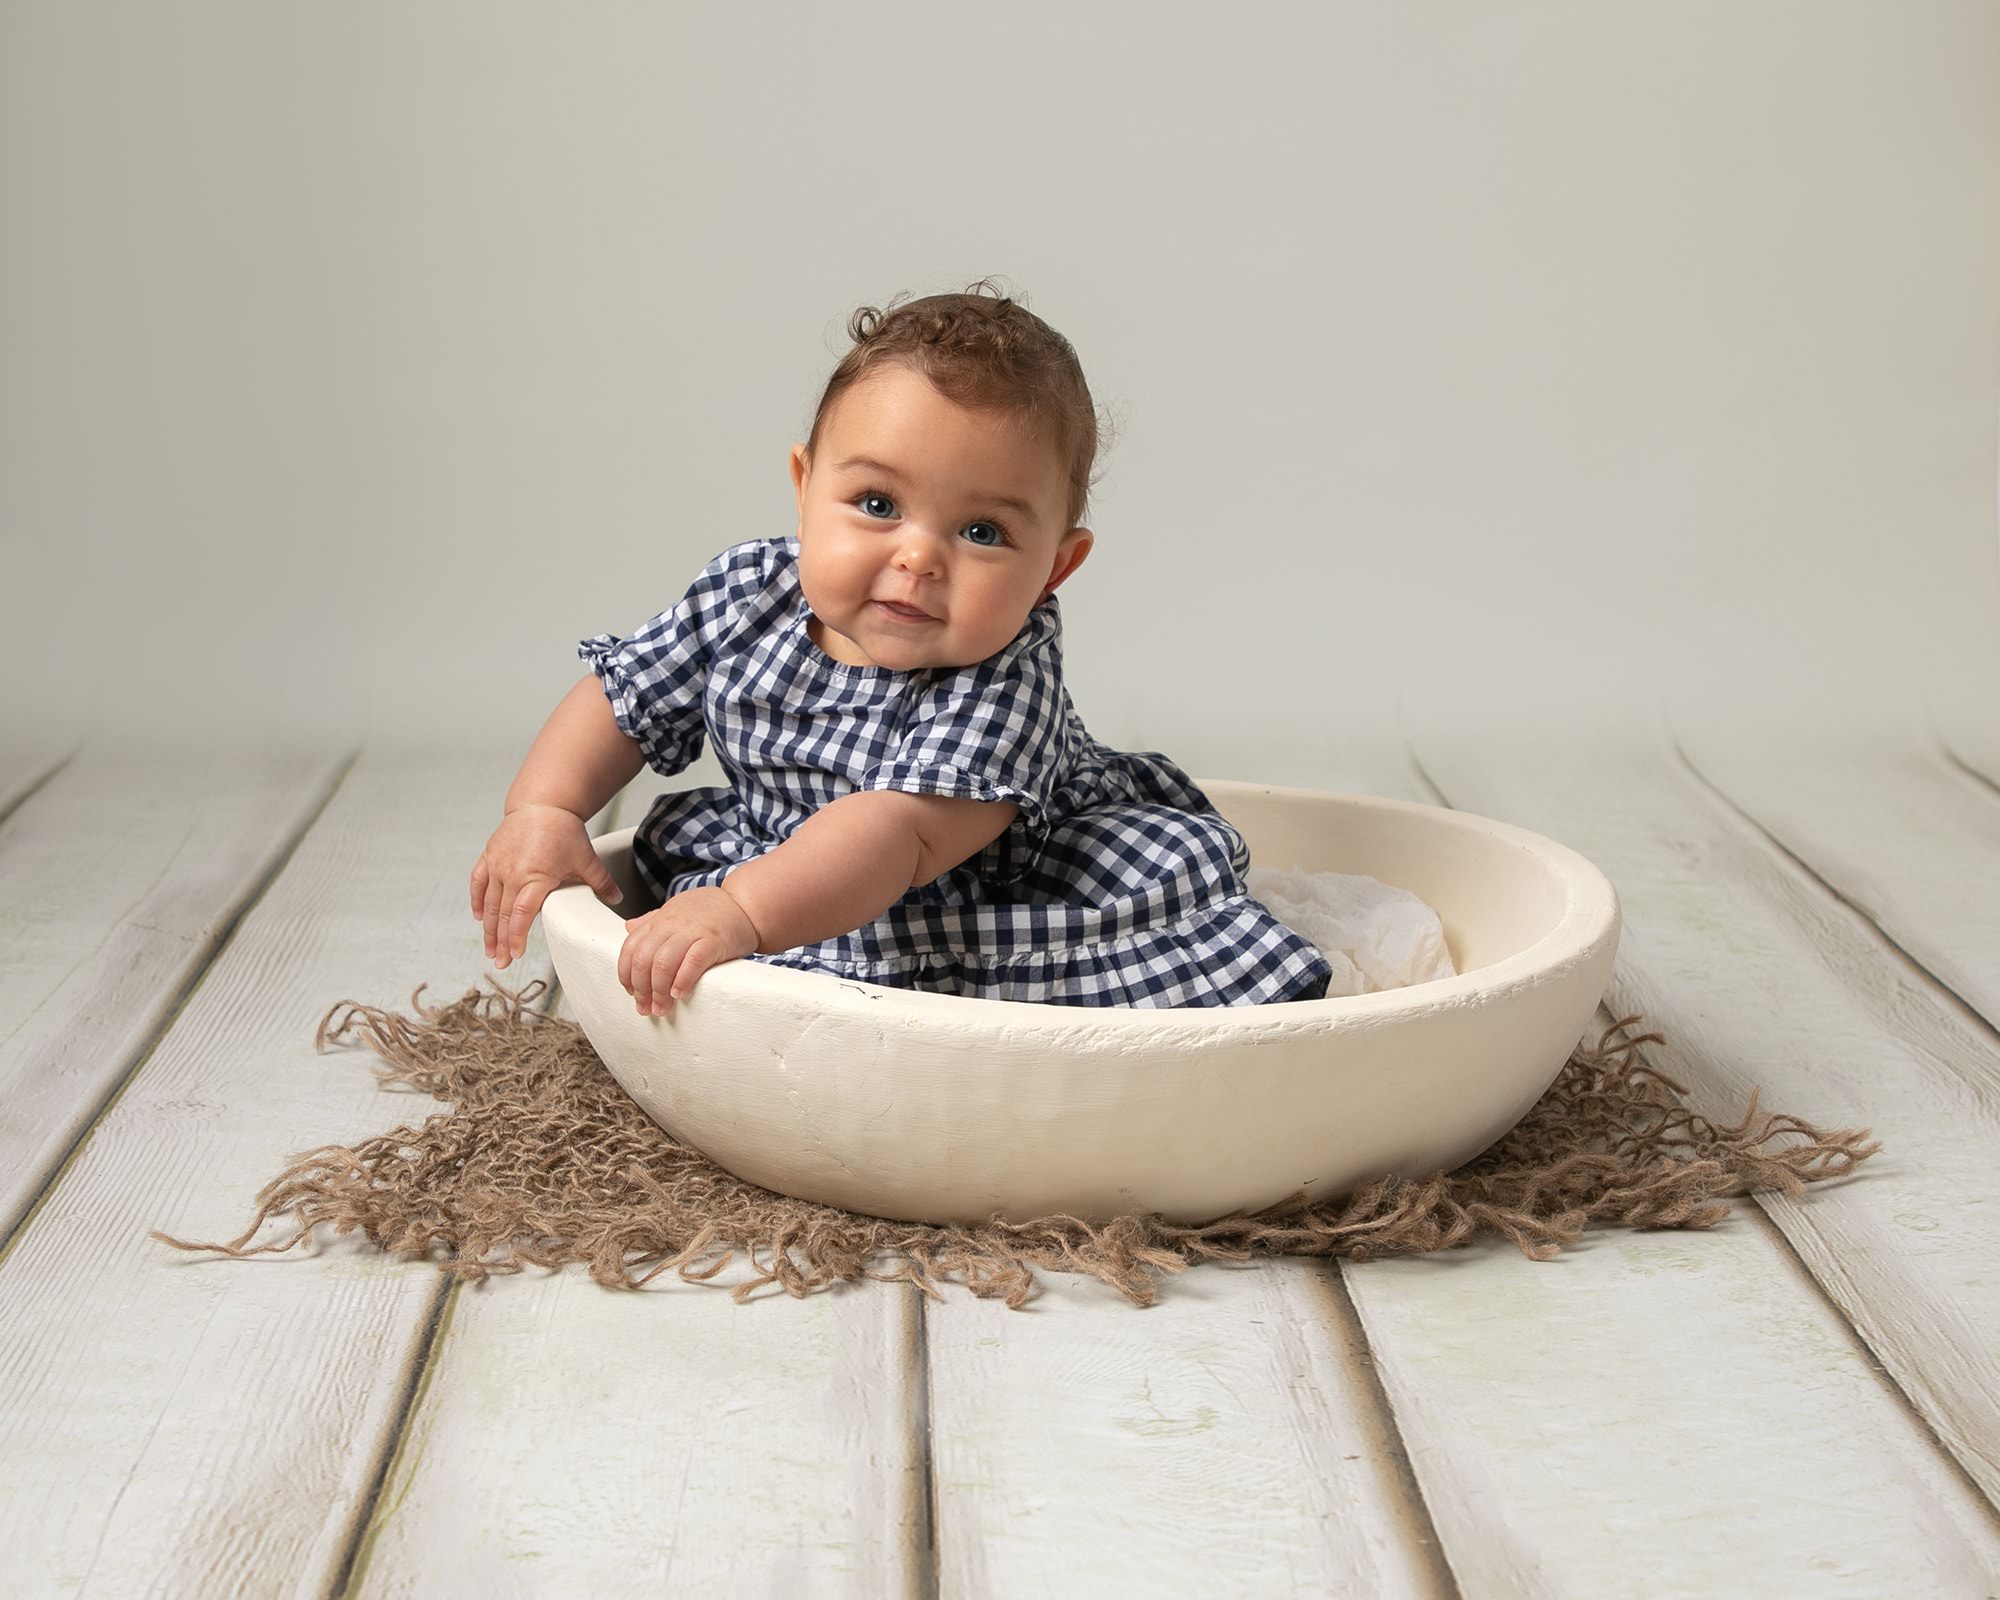 Baby girl in blue & white gingham dress sat in a cream bowl, leaning to the side and looking forward. Baby is having a photoshoot with Glasgow photographer